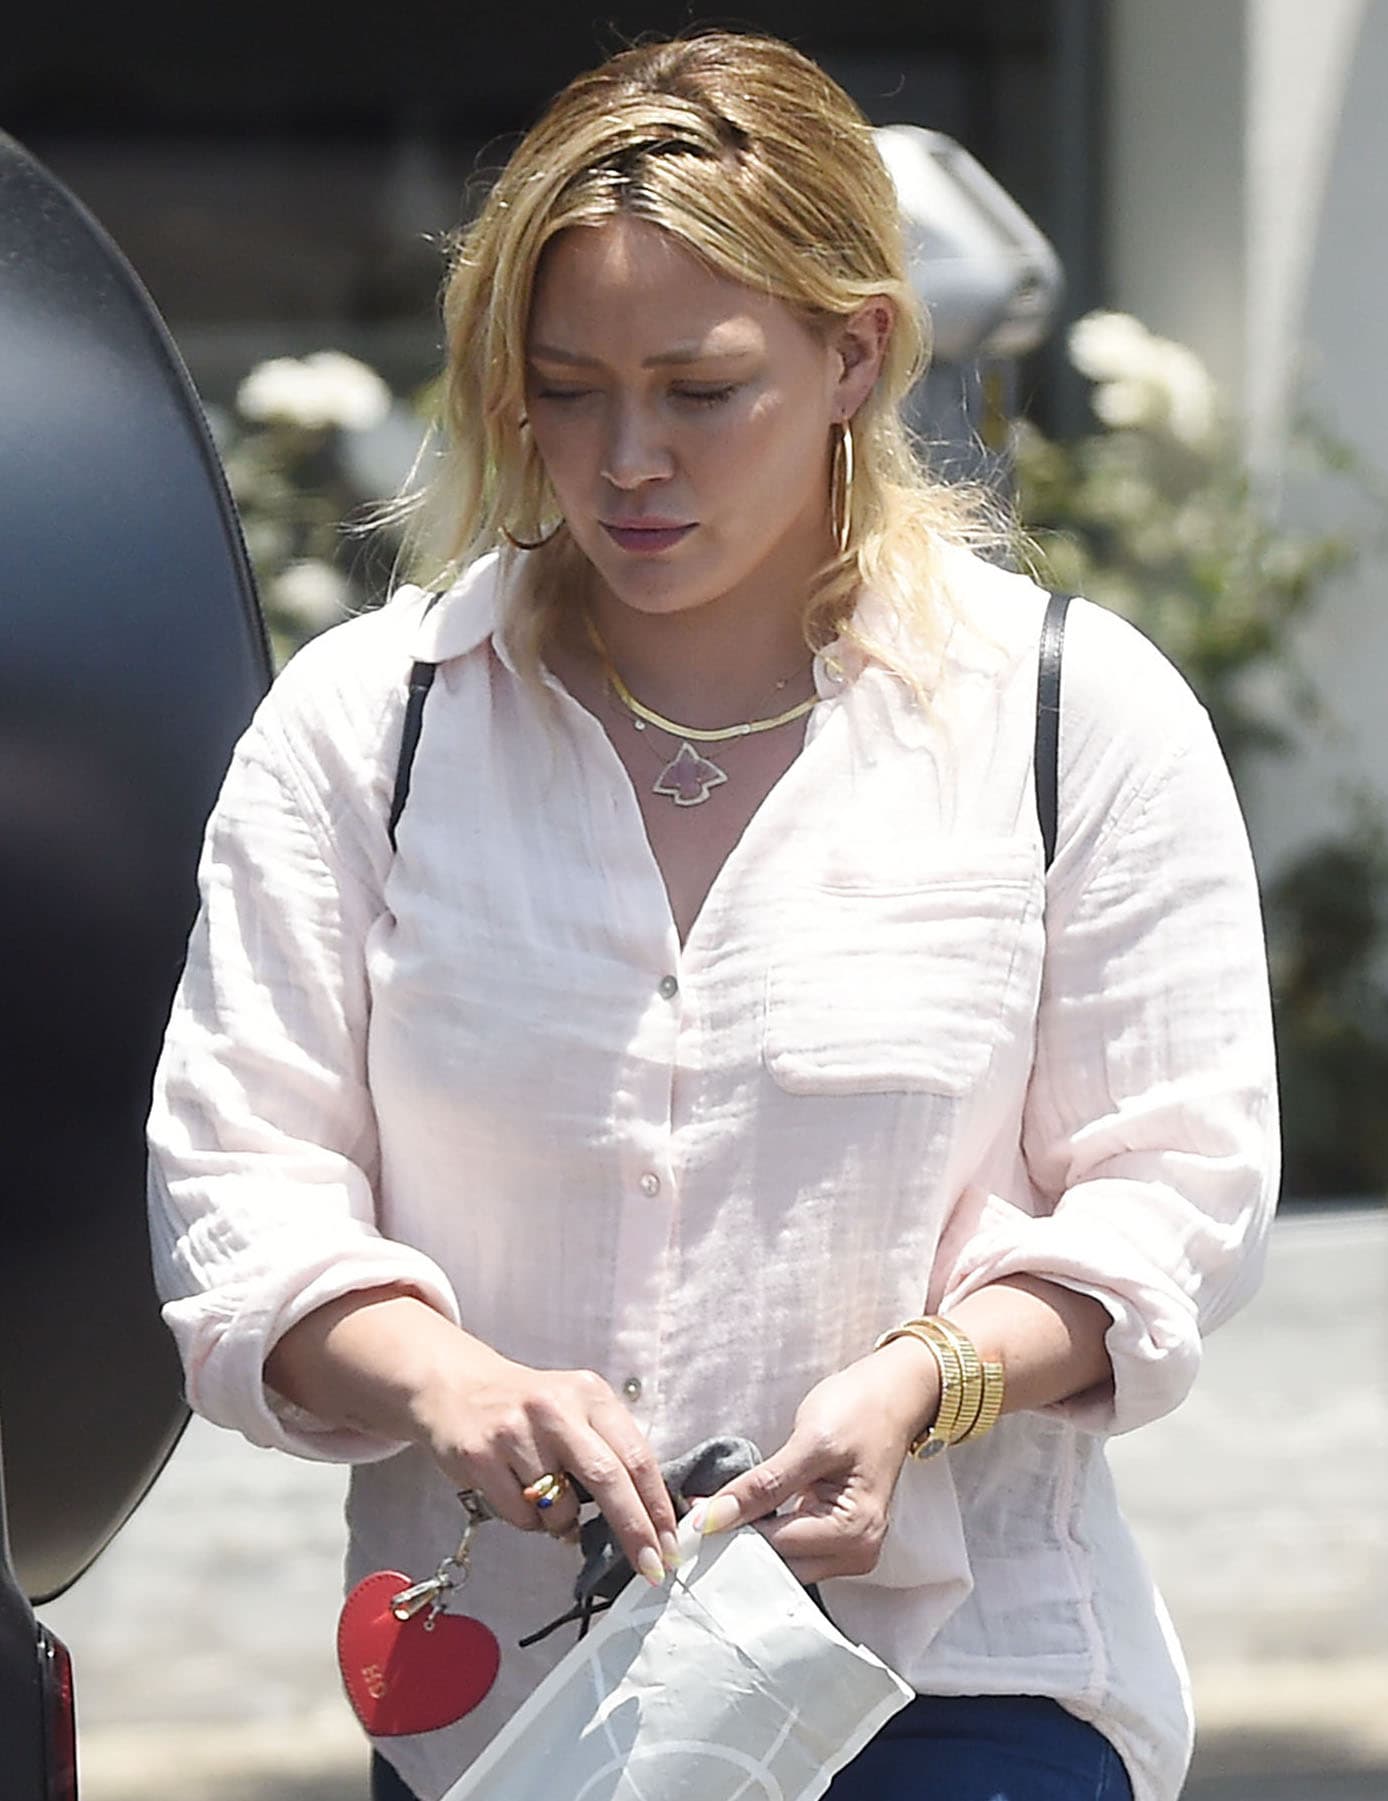 Hilary Duff wears a messy hairstyle with subtle pink makeup